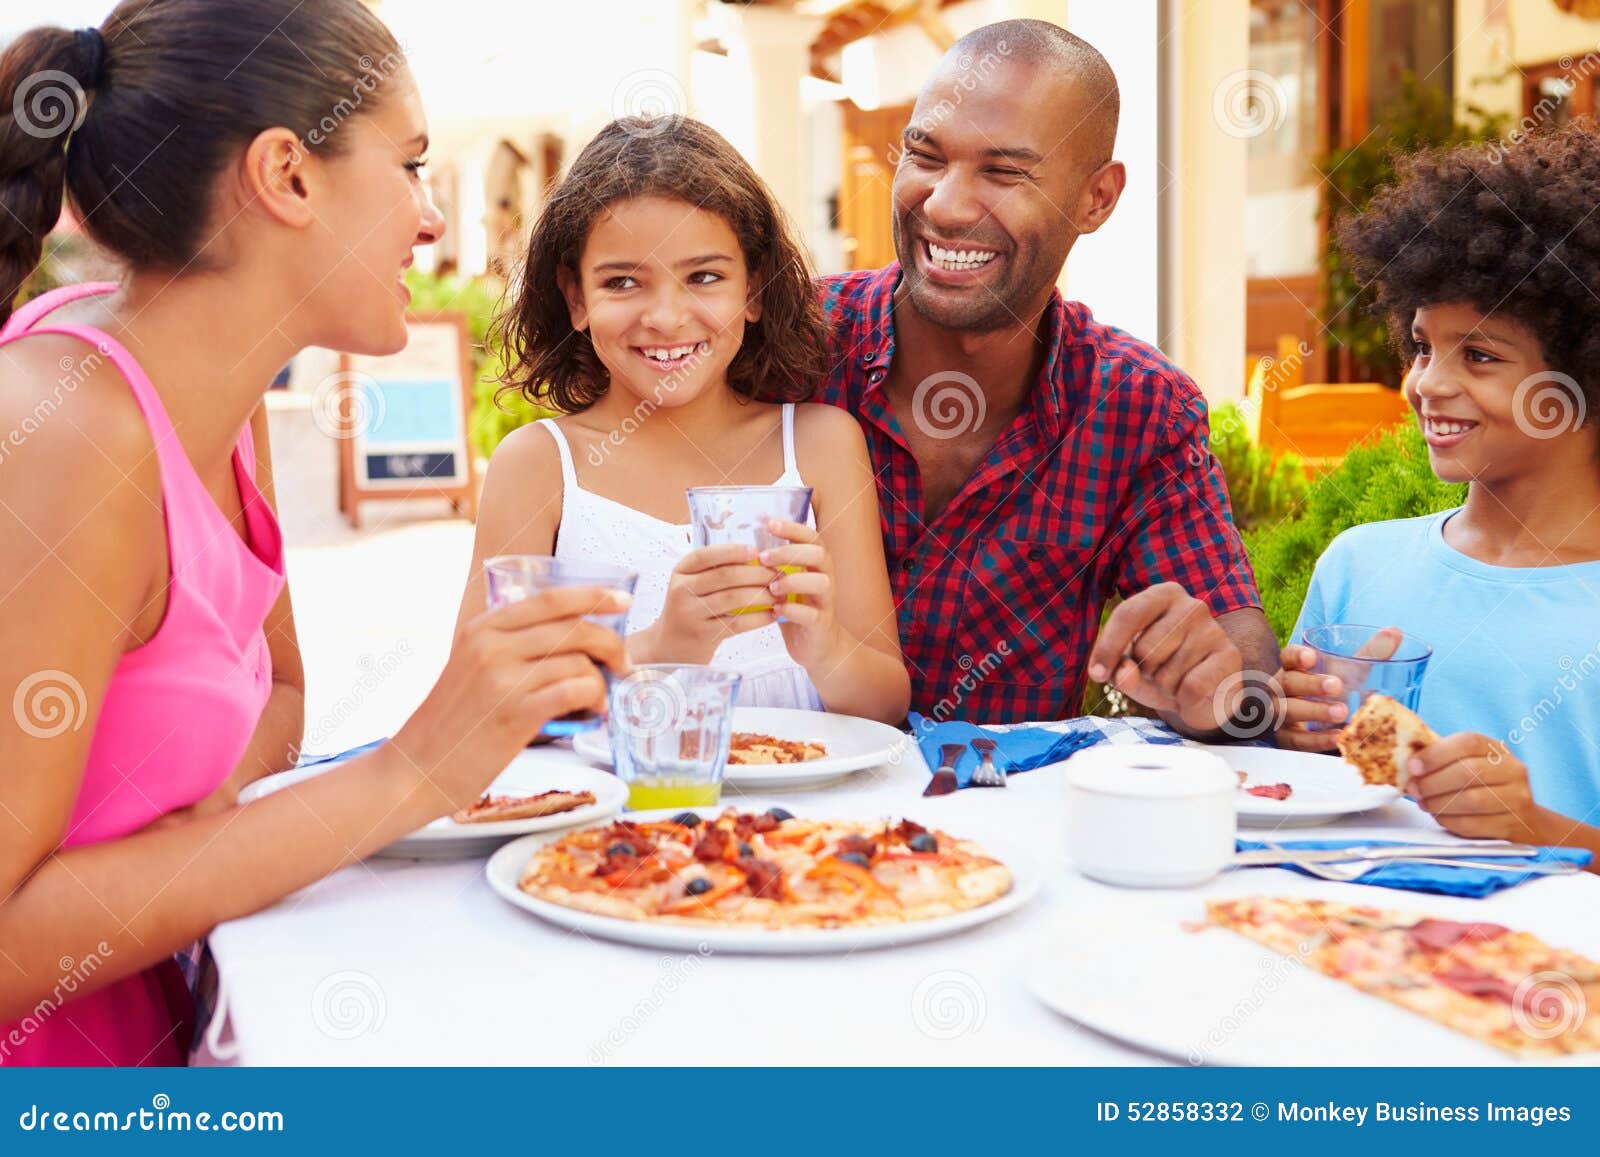 Family Eating Meal at Outdoor Restaurant Together Stock Photo - Image